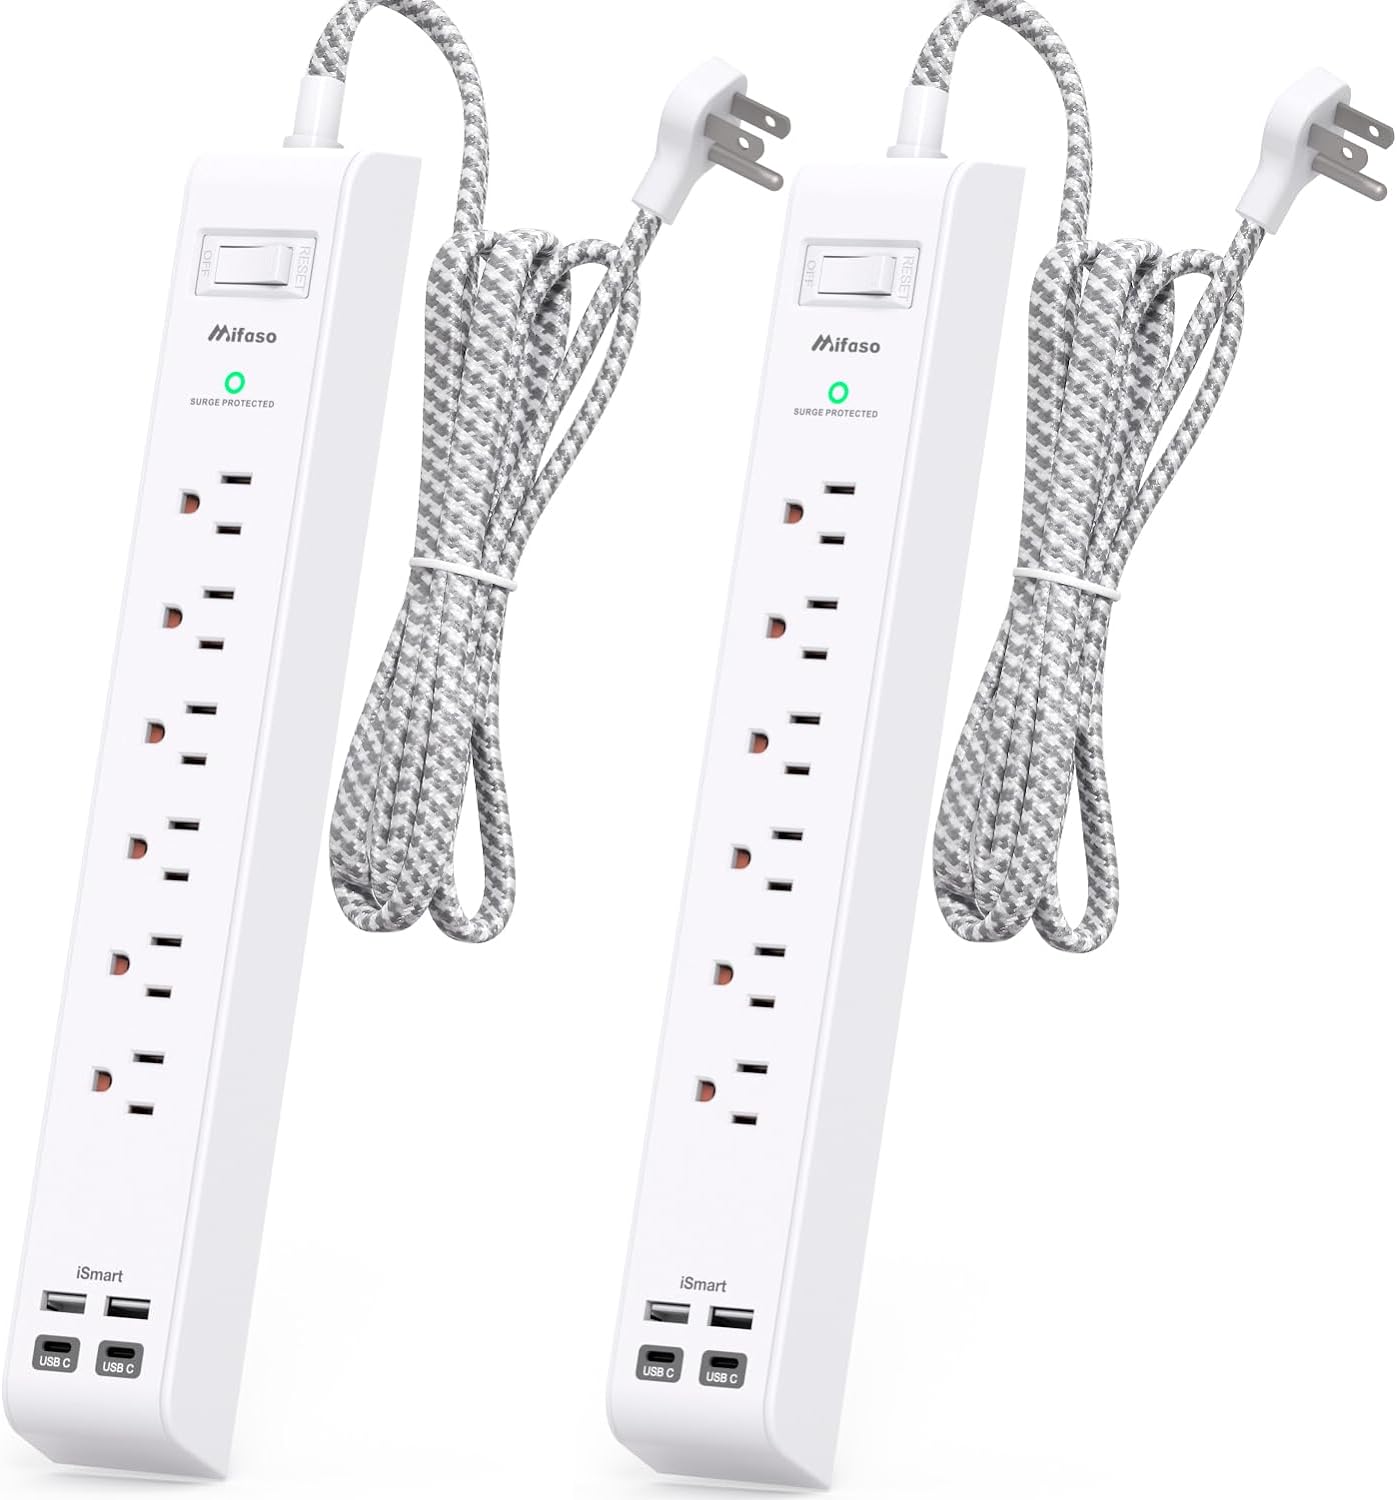 2 Pack Power Strip Surge Protector - 6 Outlets 4 USB Charging Ports, 5Ft Braided Extension Cord, Flat Plug, Overload Protection, Wall Mount for Home Office, Dorm Room Essentials